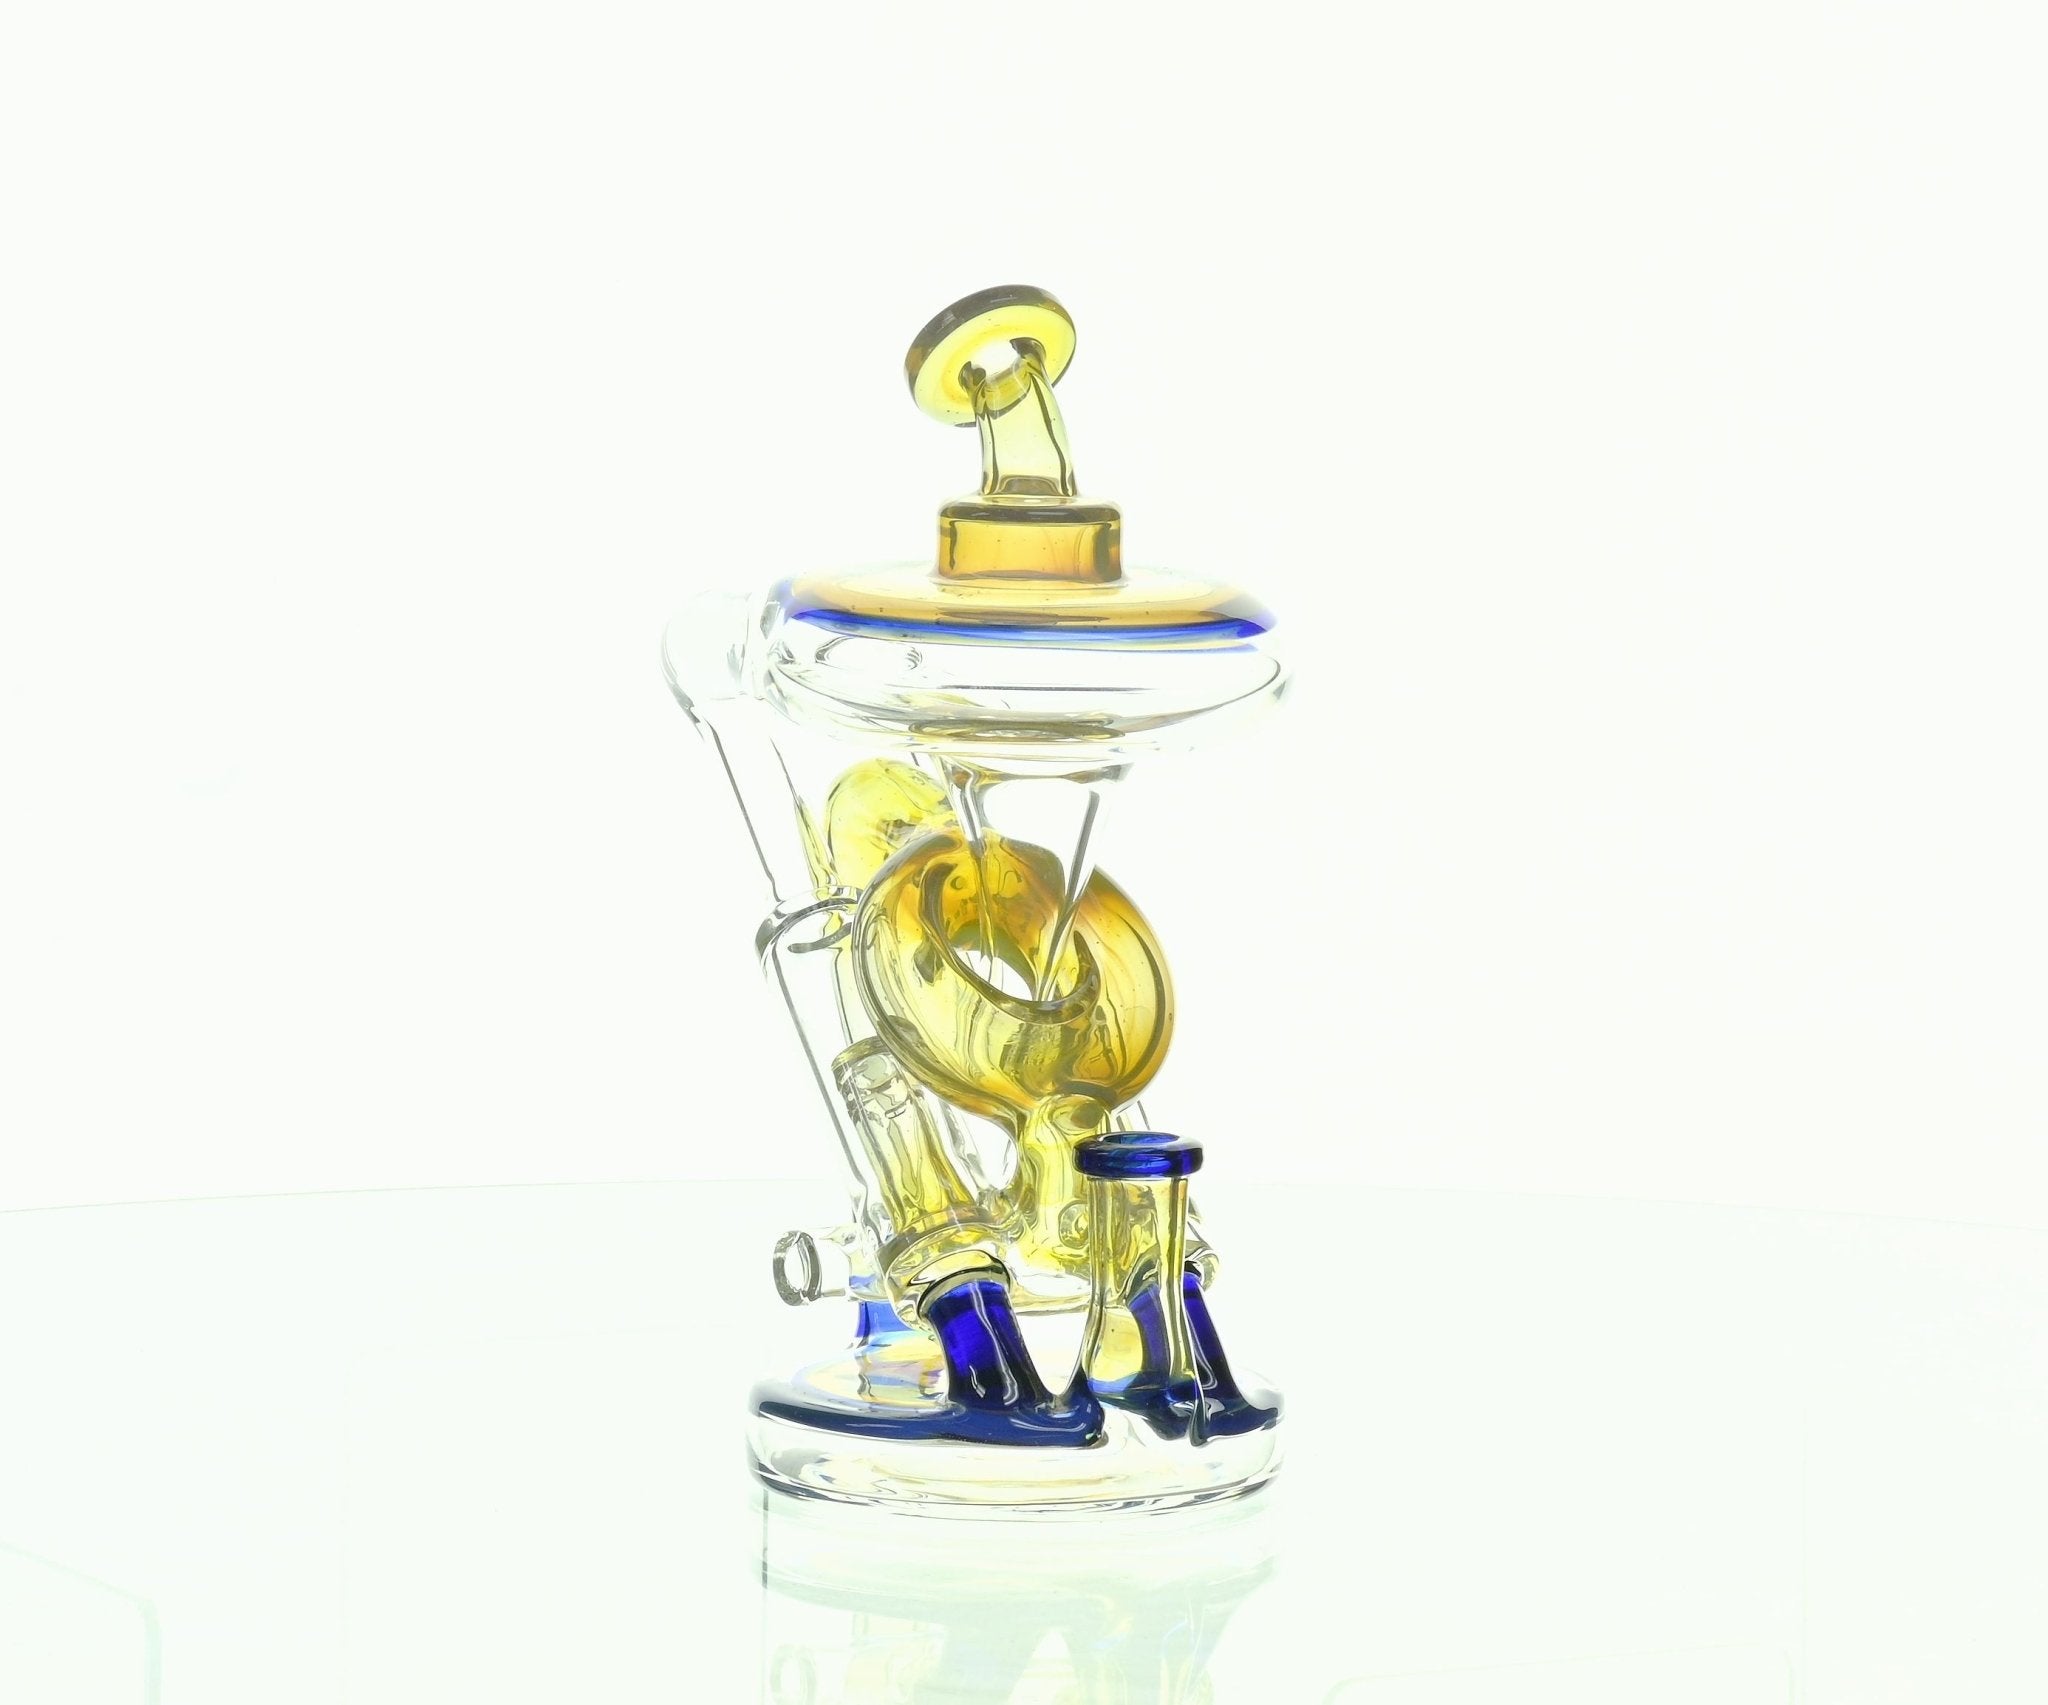 NIB GLASS PARTIAL COLOR PISTON RIG EXTRA LIGHT YELLOW/OPAL LAVENDER & BRILLIANT BLUE ACCENTS - SSSS